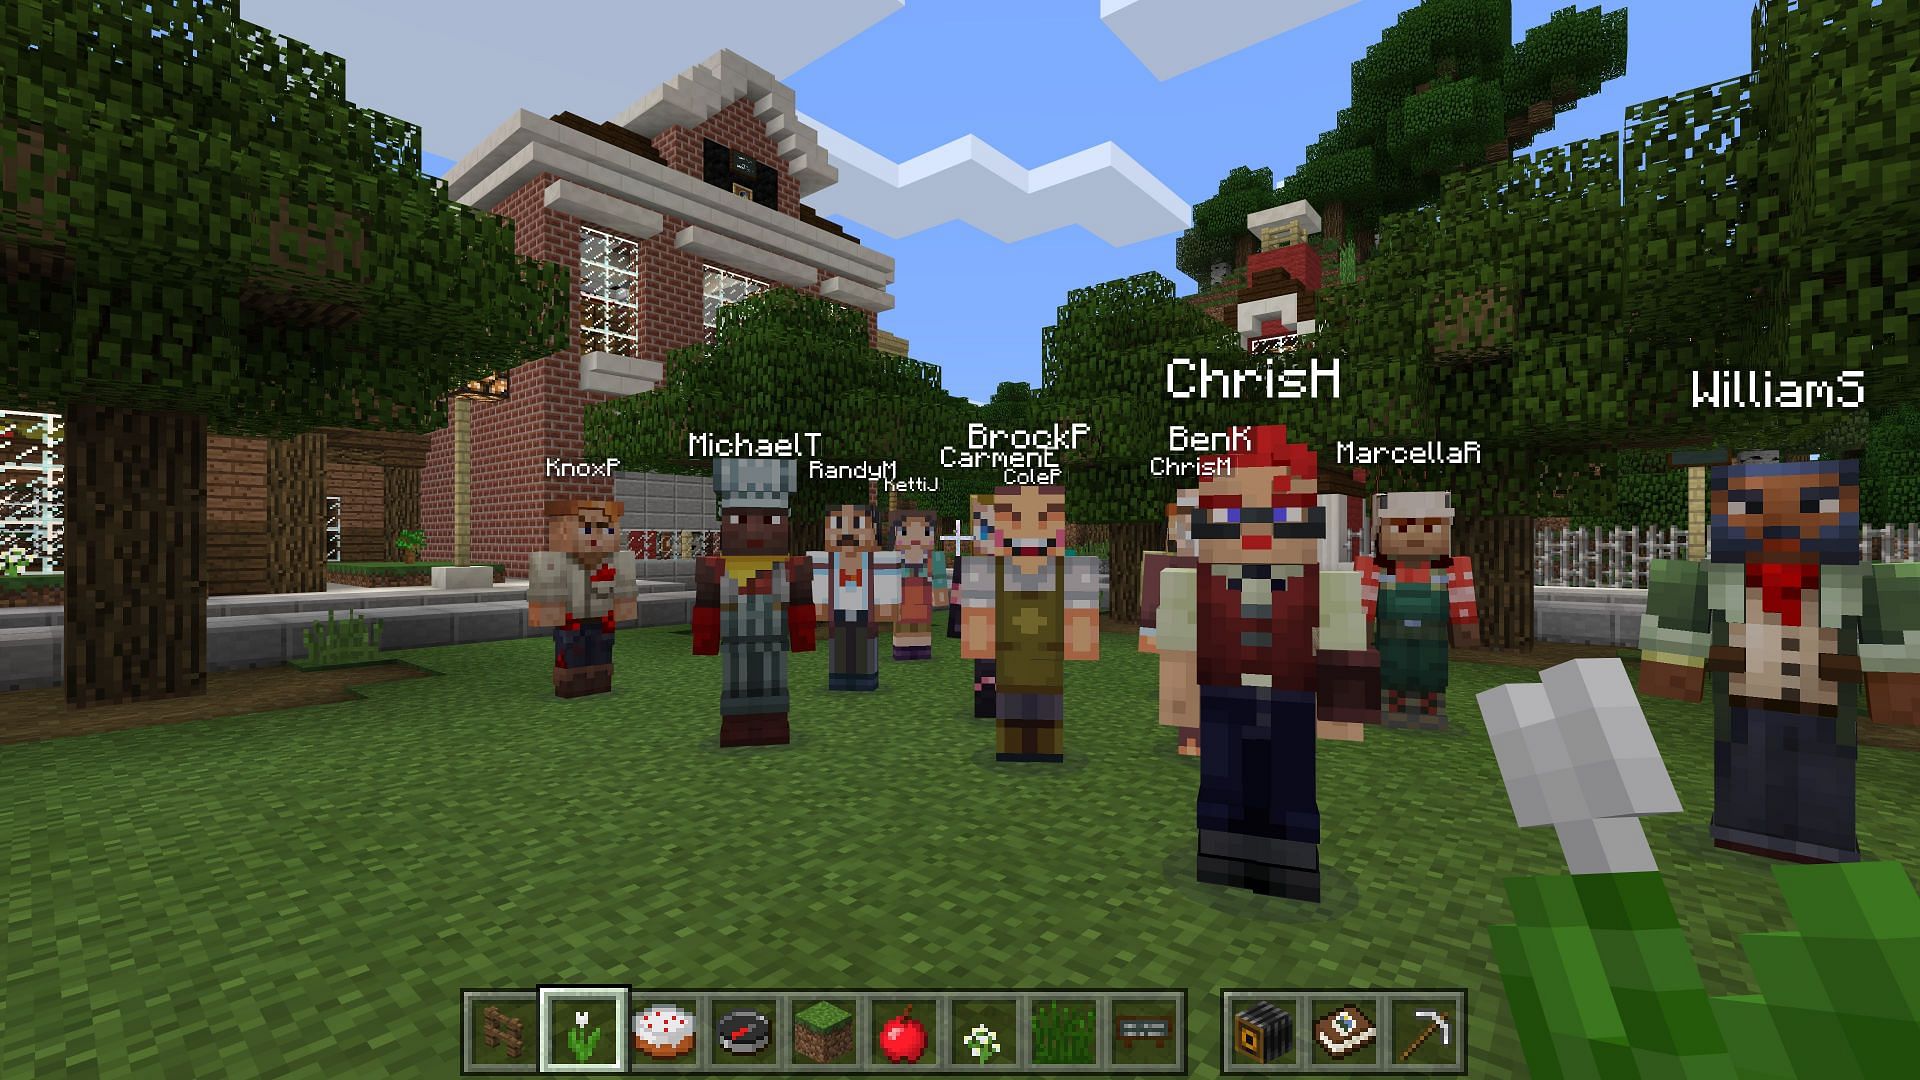 NPCs are similar to villagers but are found primarily in Minecraft: Education Edition (Image via Mojang)